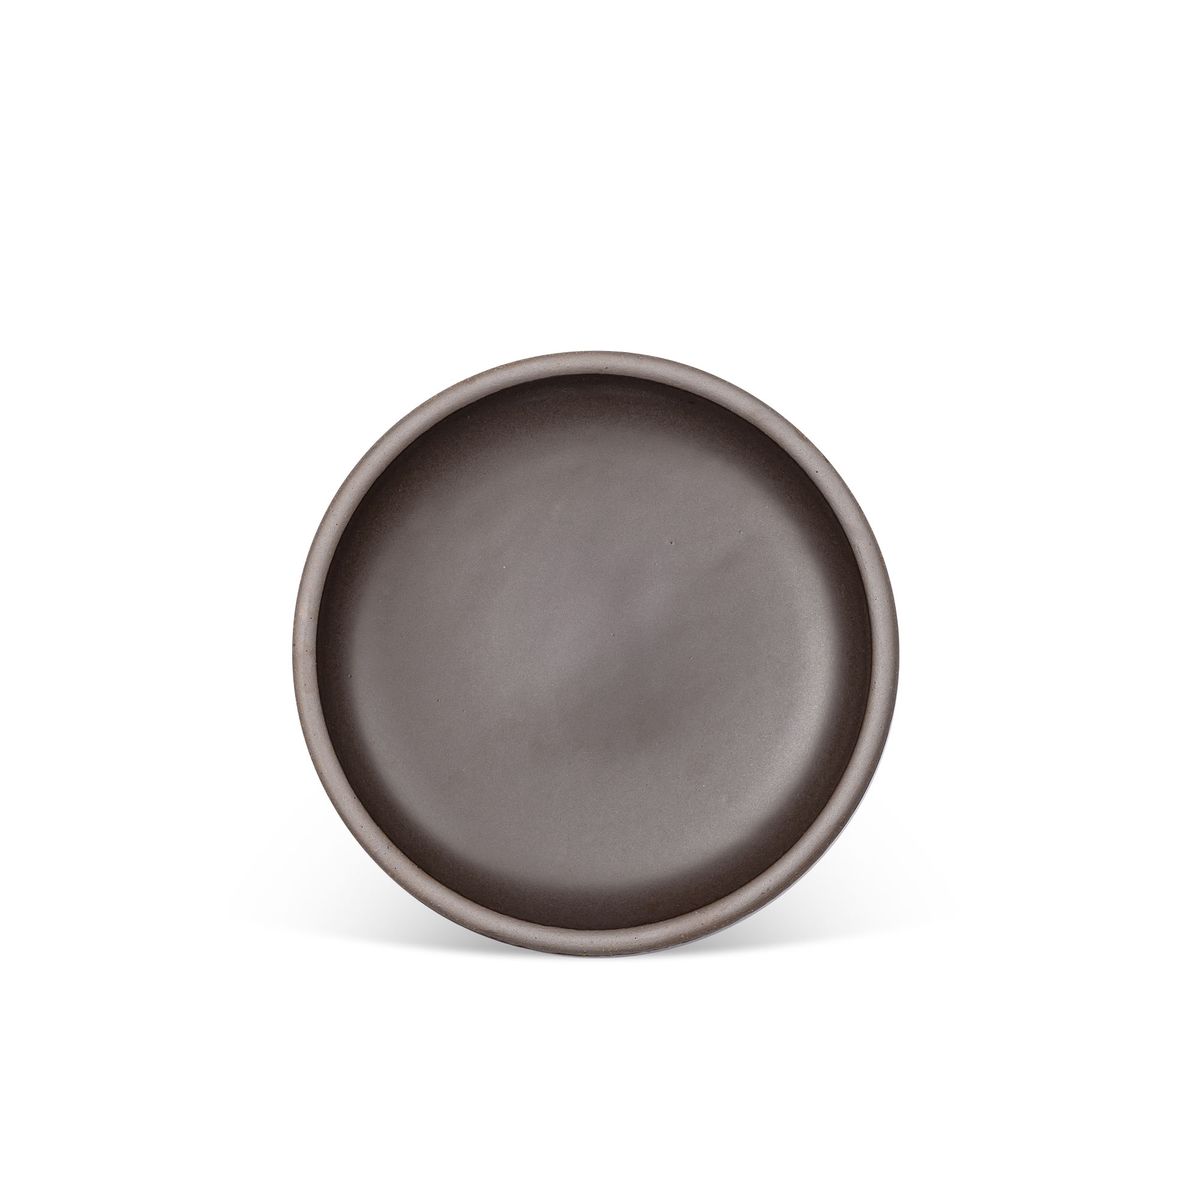 A medium sized ceramic plate in a dark cool brown color featuring iron speckles and an unglazed rim.